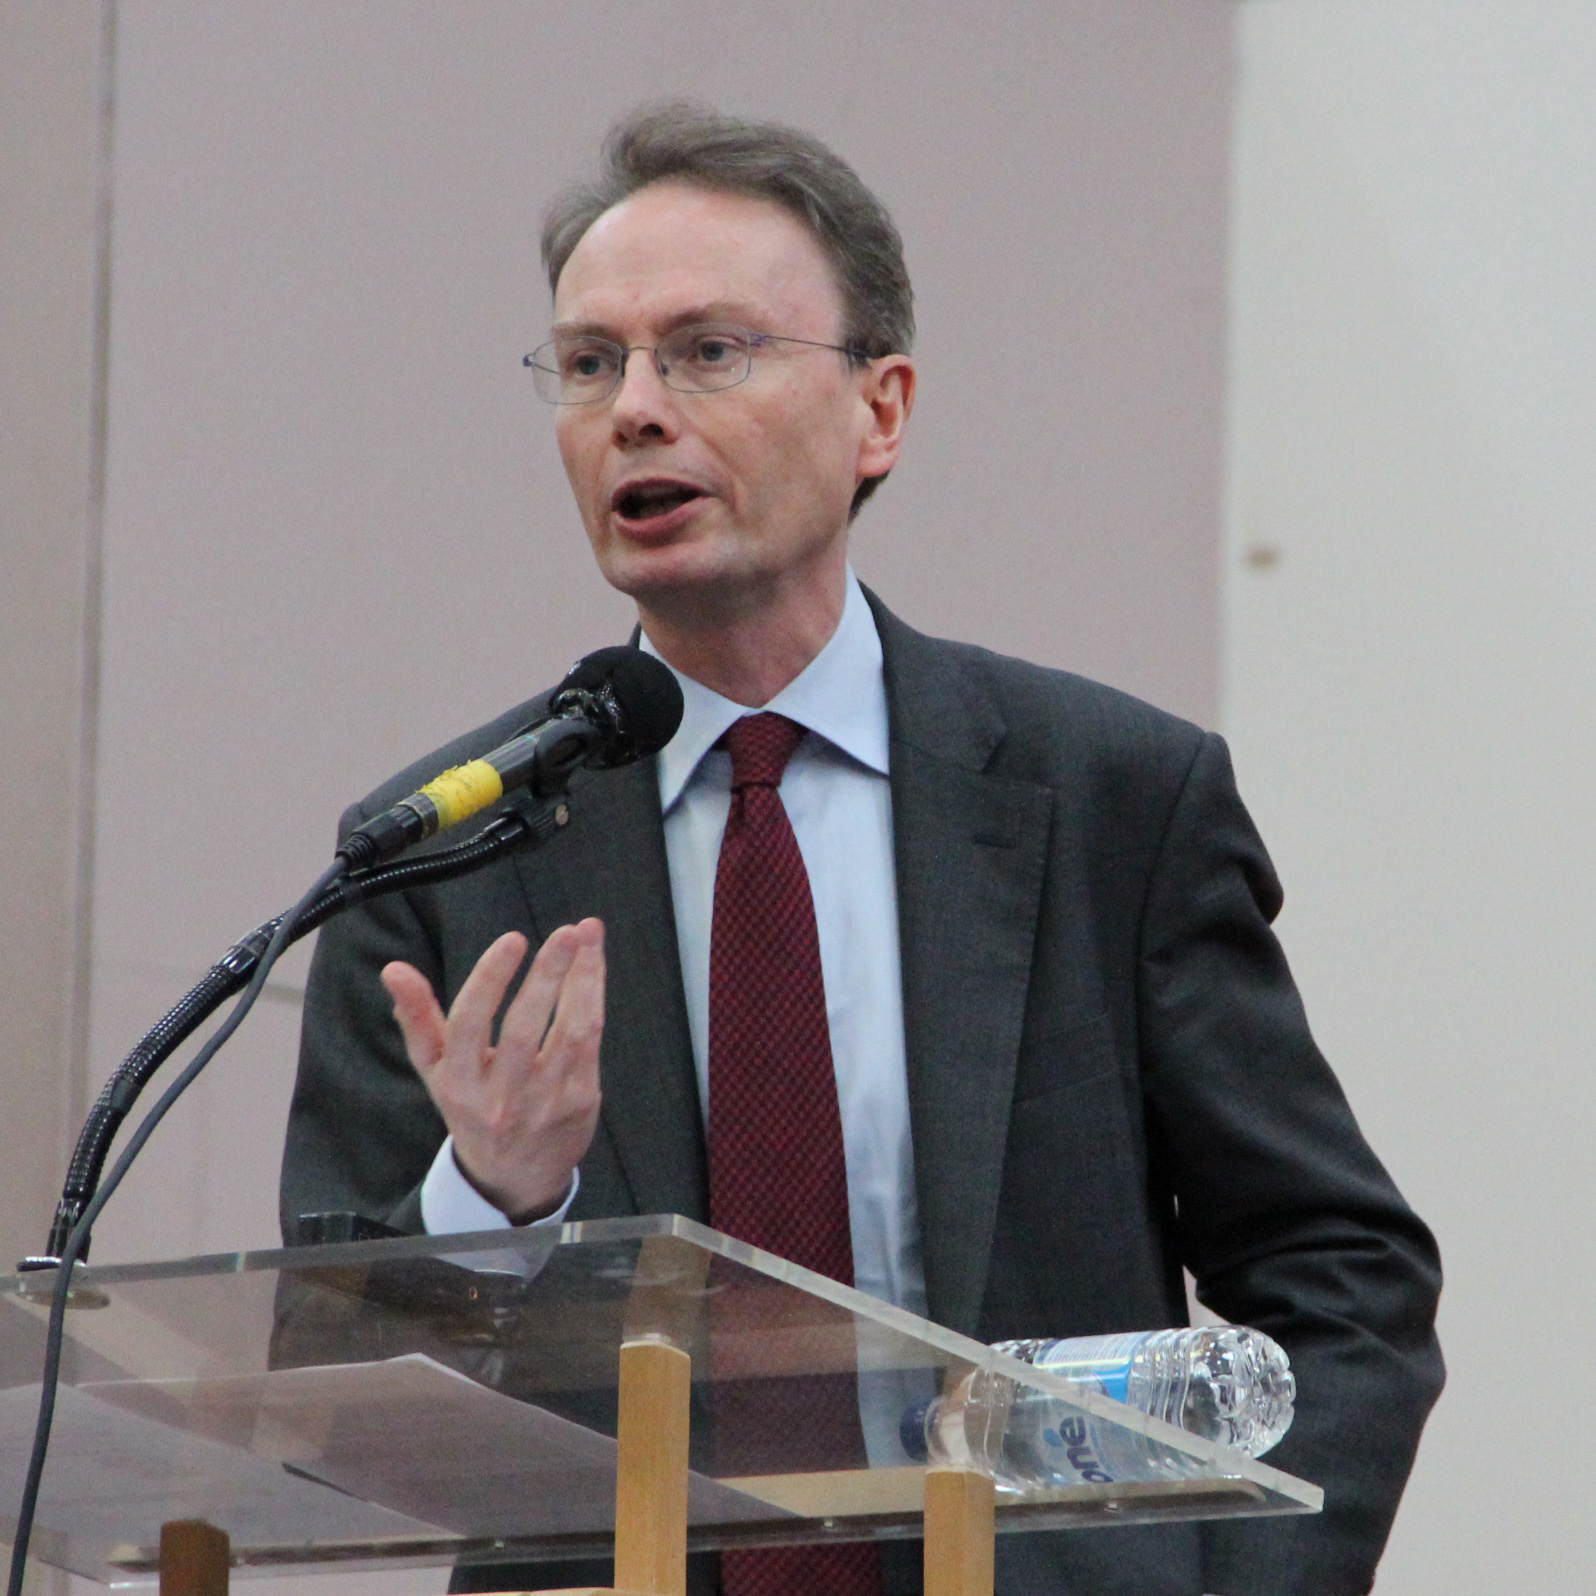 Professor Thomas Pink of King’s College London speaks on ‘Church and state after Vatican II’ at the 2014 LMS Conference